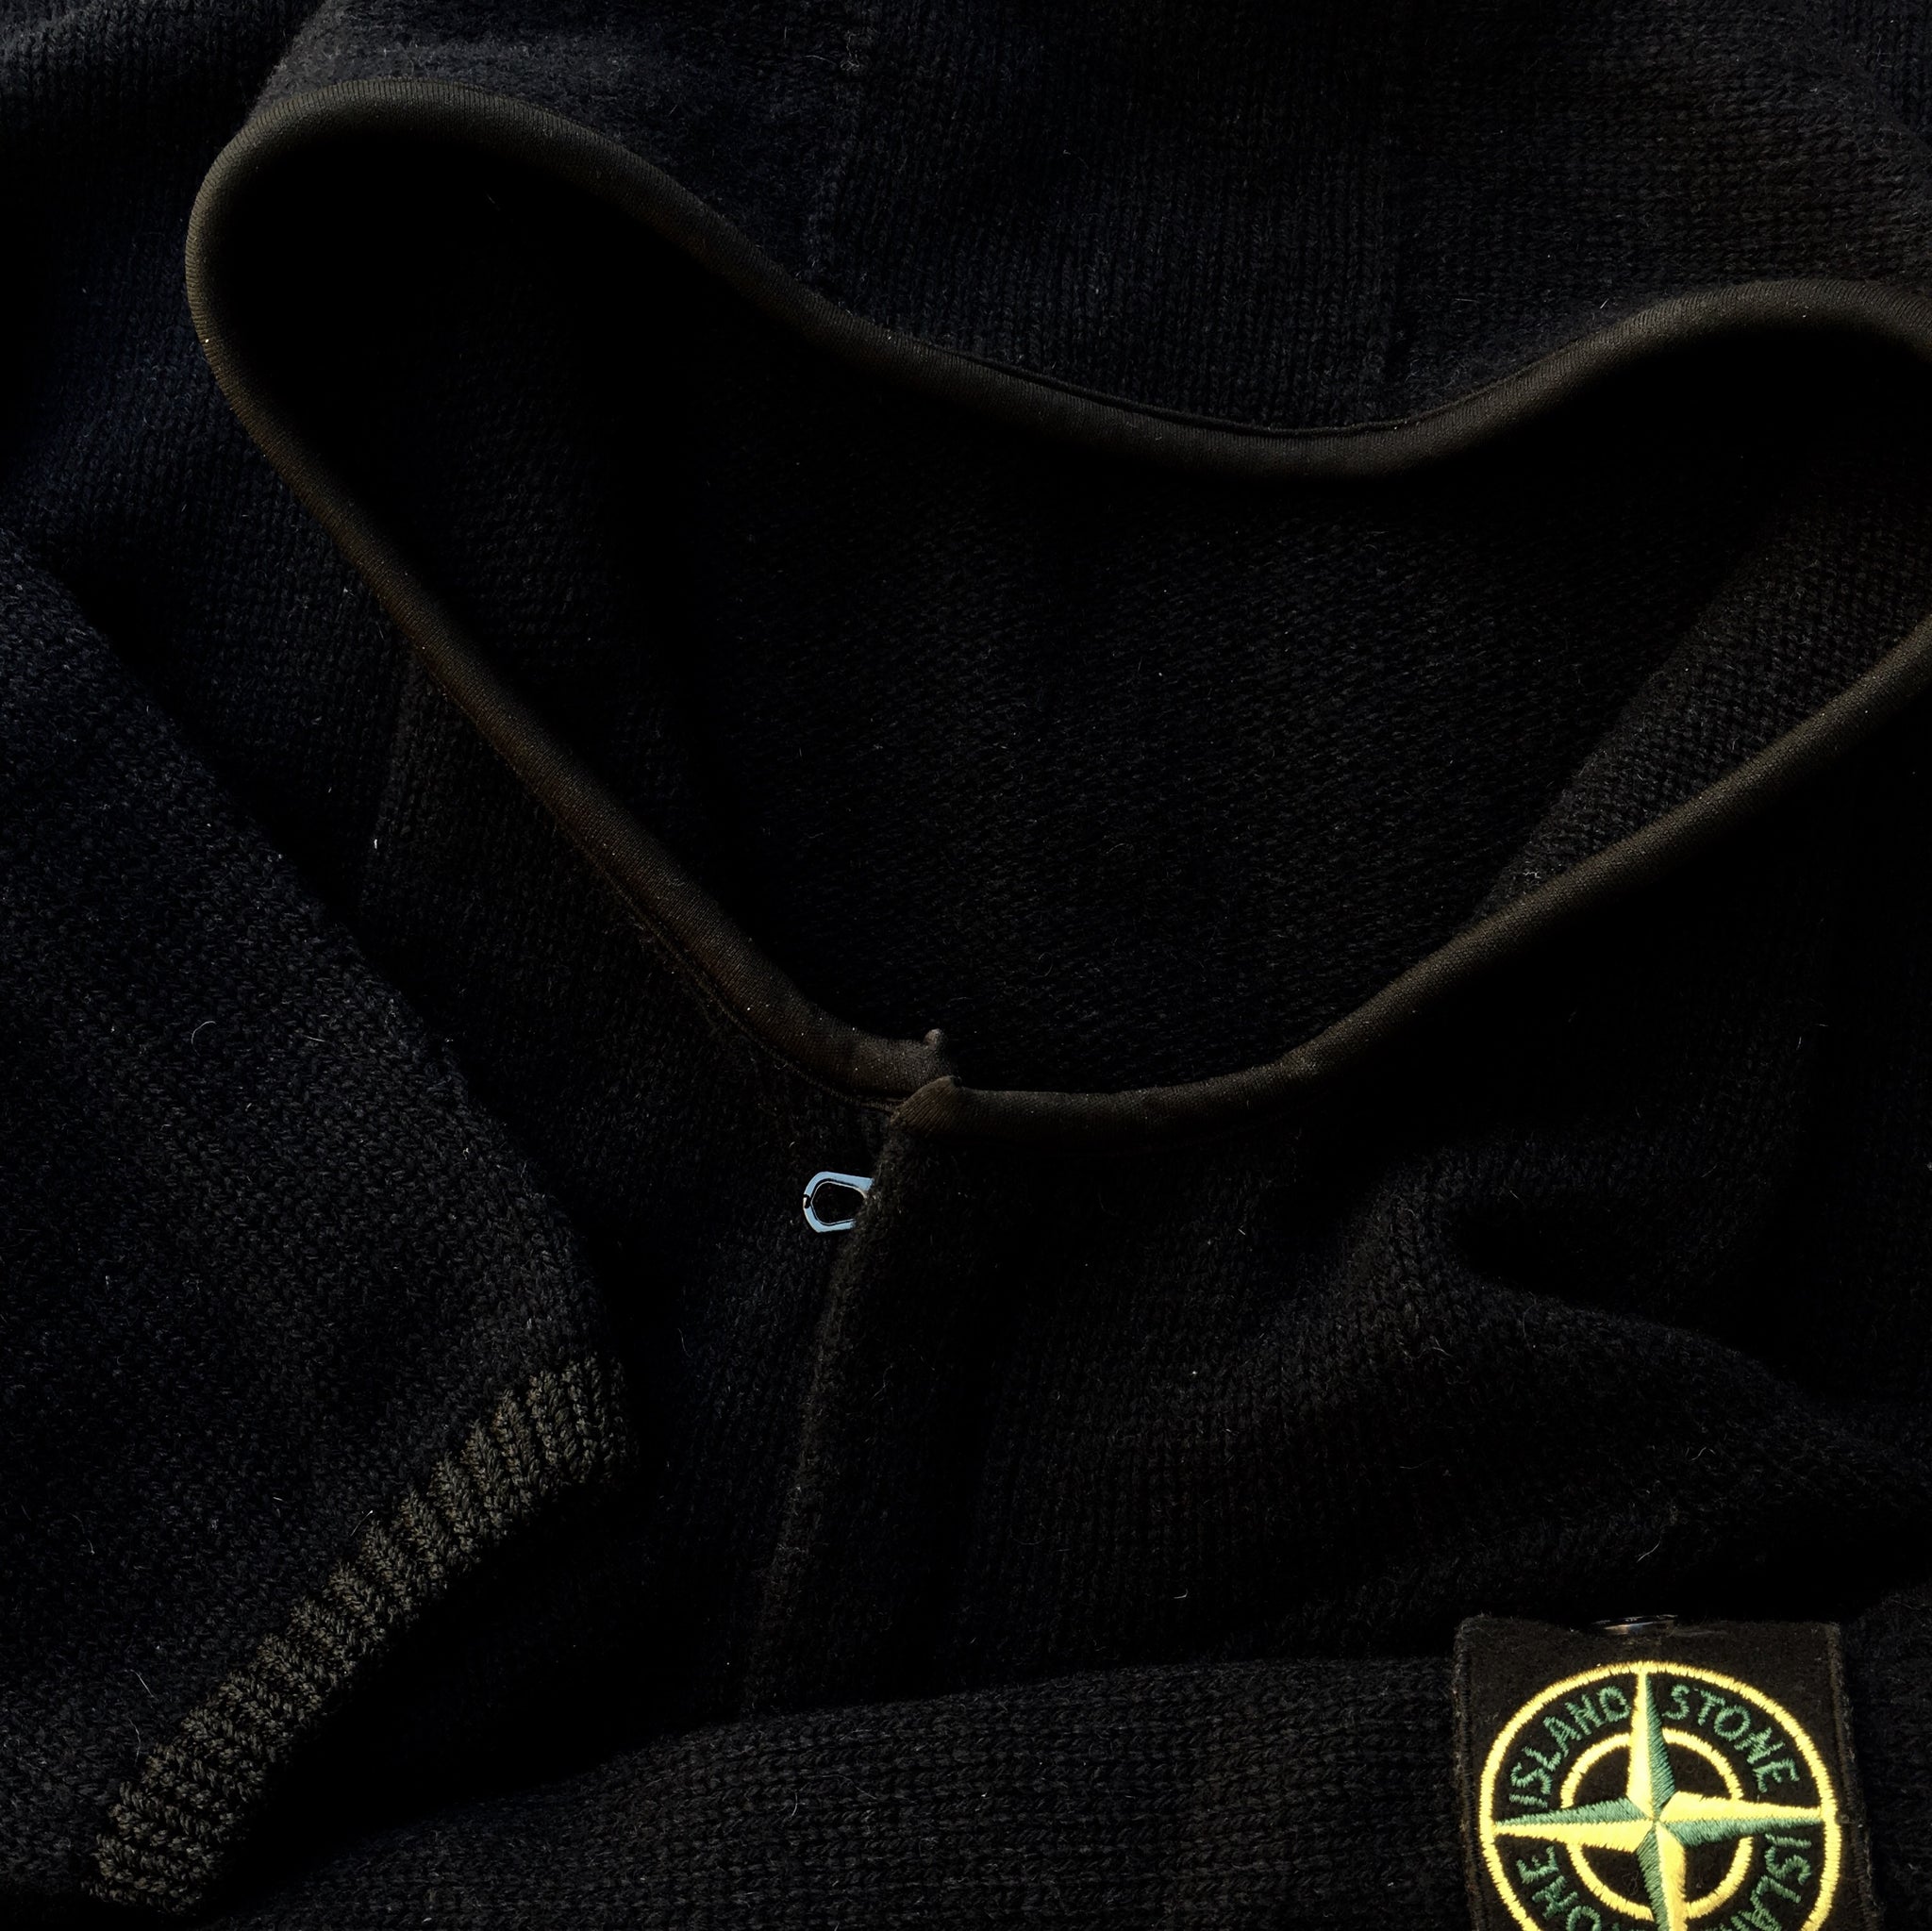 Stone Island AW 2004 Hooded Knit - S/M